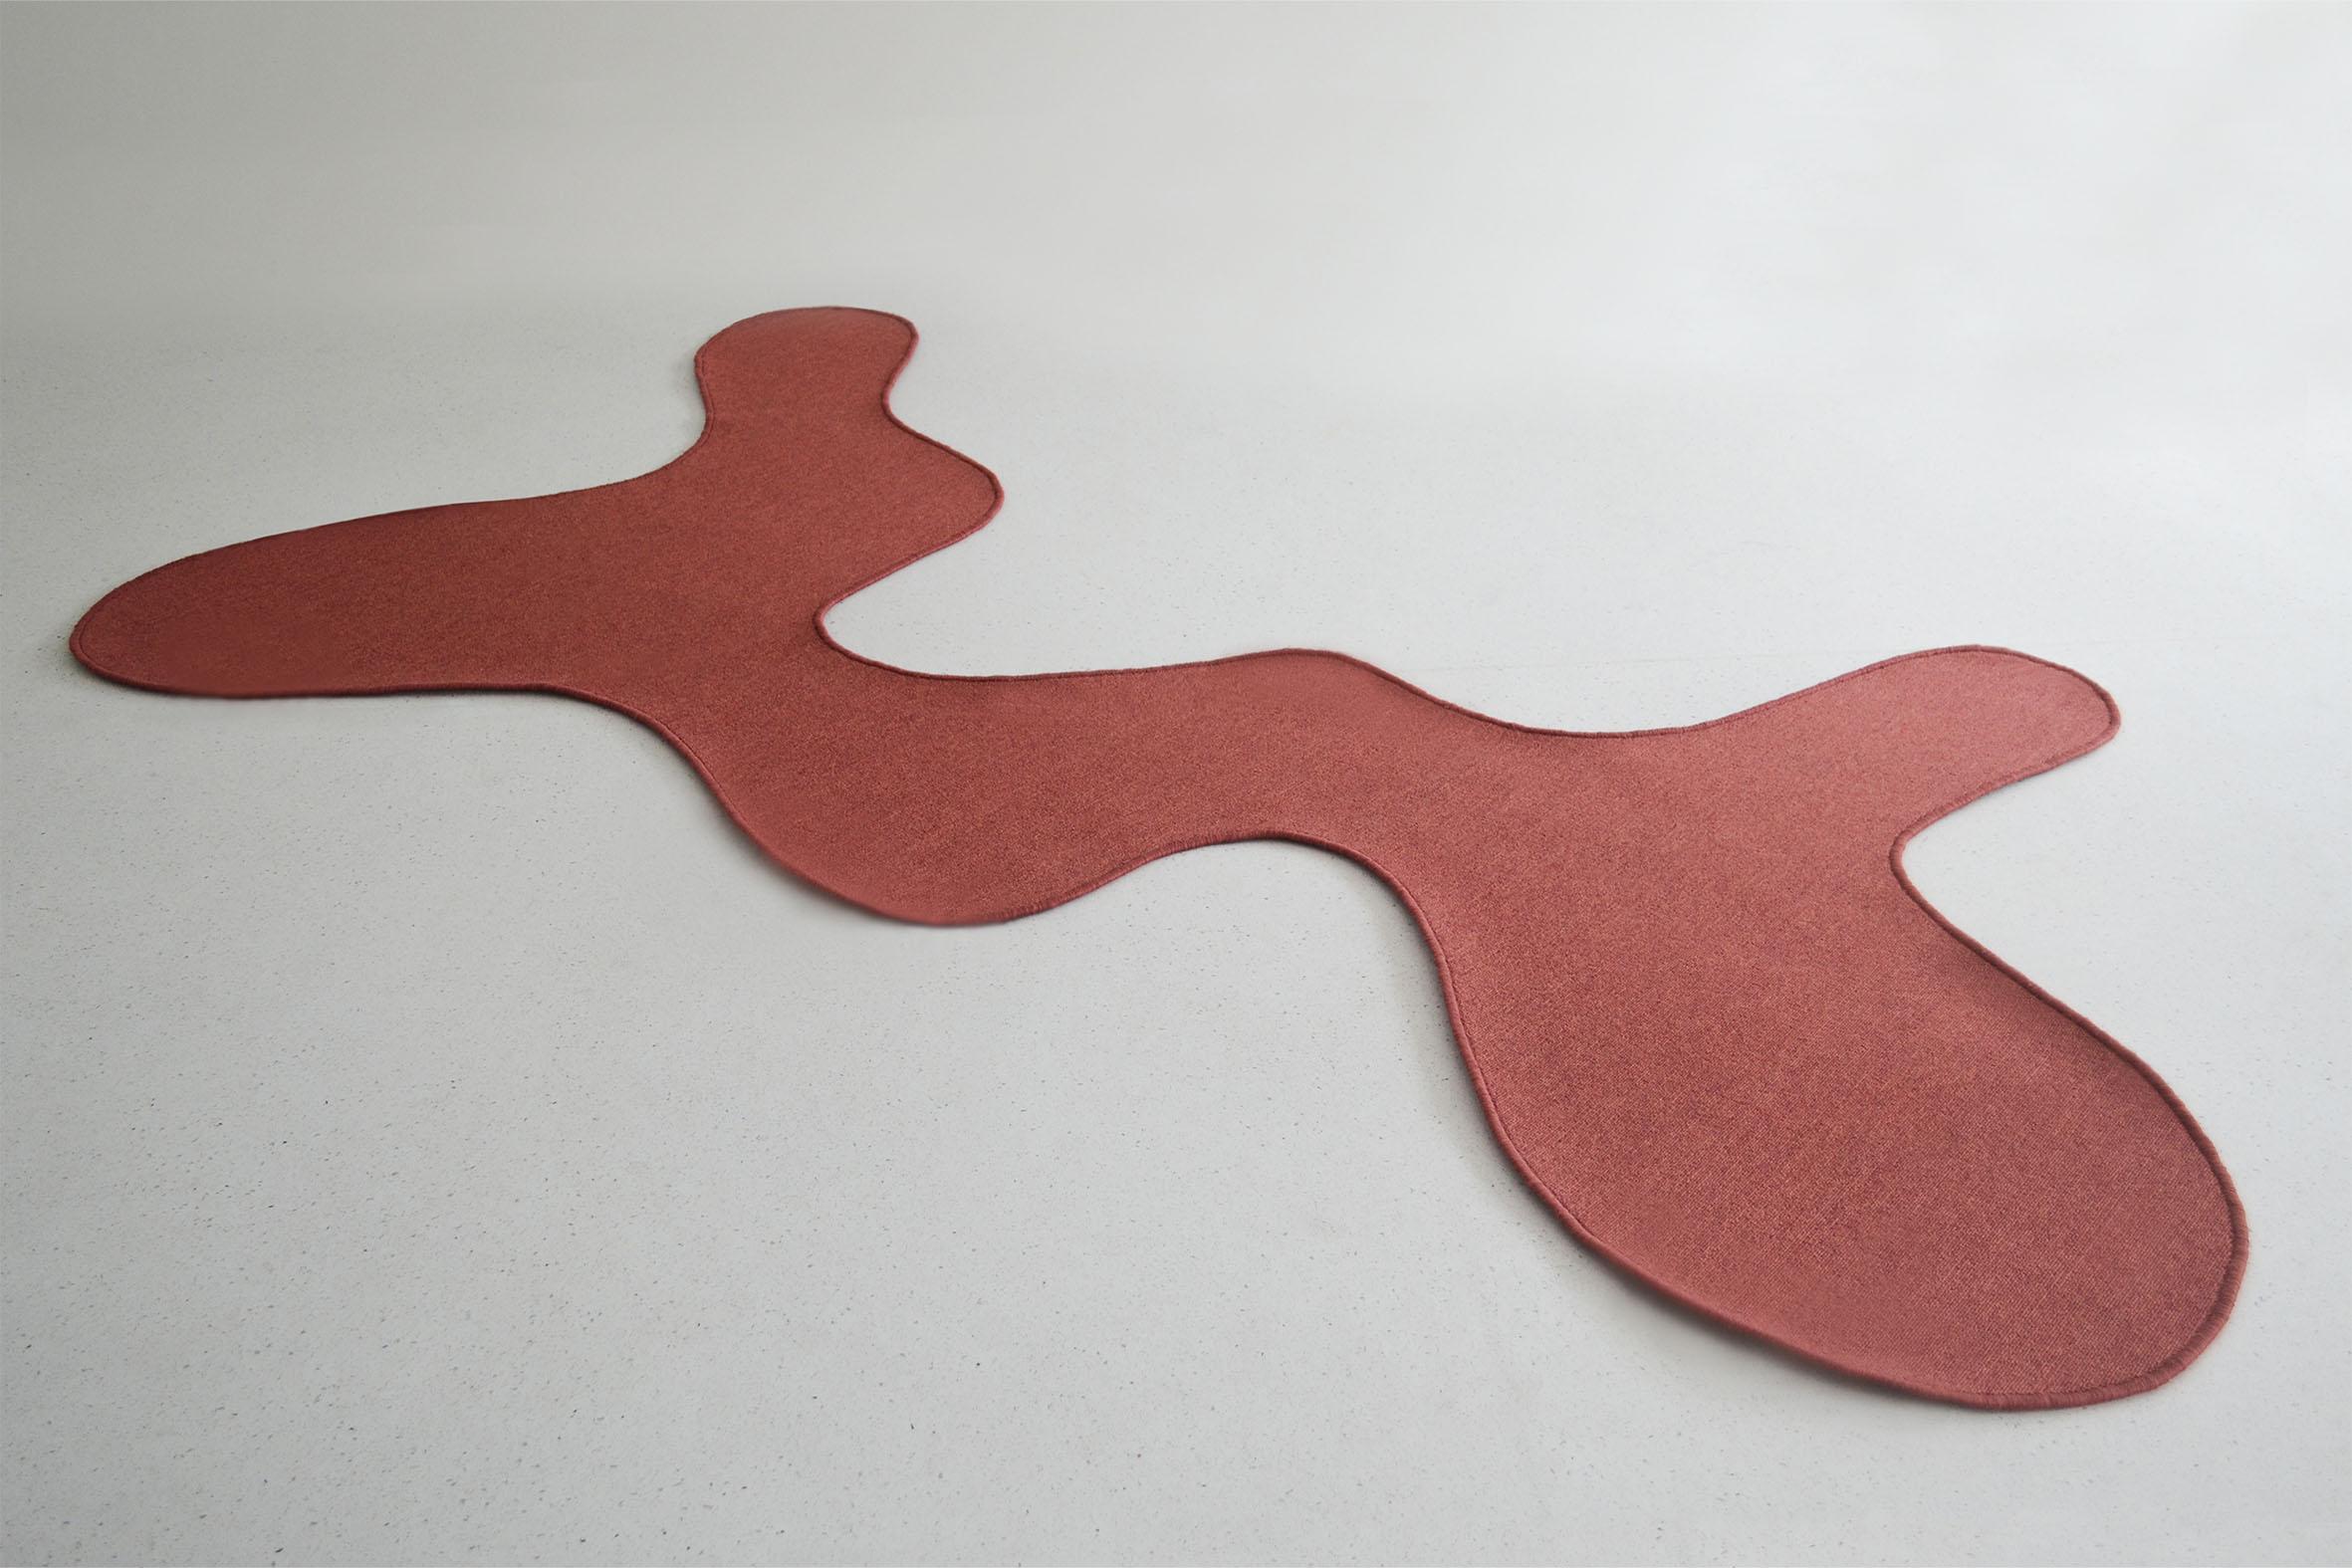 Aki Rug Maroon red by Studio Christinekalia
Dimensions: W 180 x L 300.
Materials: Artificial wool, felt. 

Christine Kalia is a design studio exploring modes of spatial relations between architectural, interior and product design. The studio’s